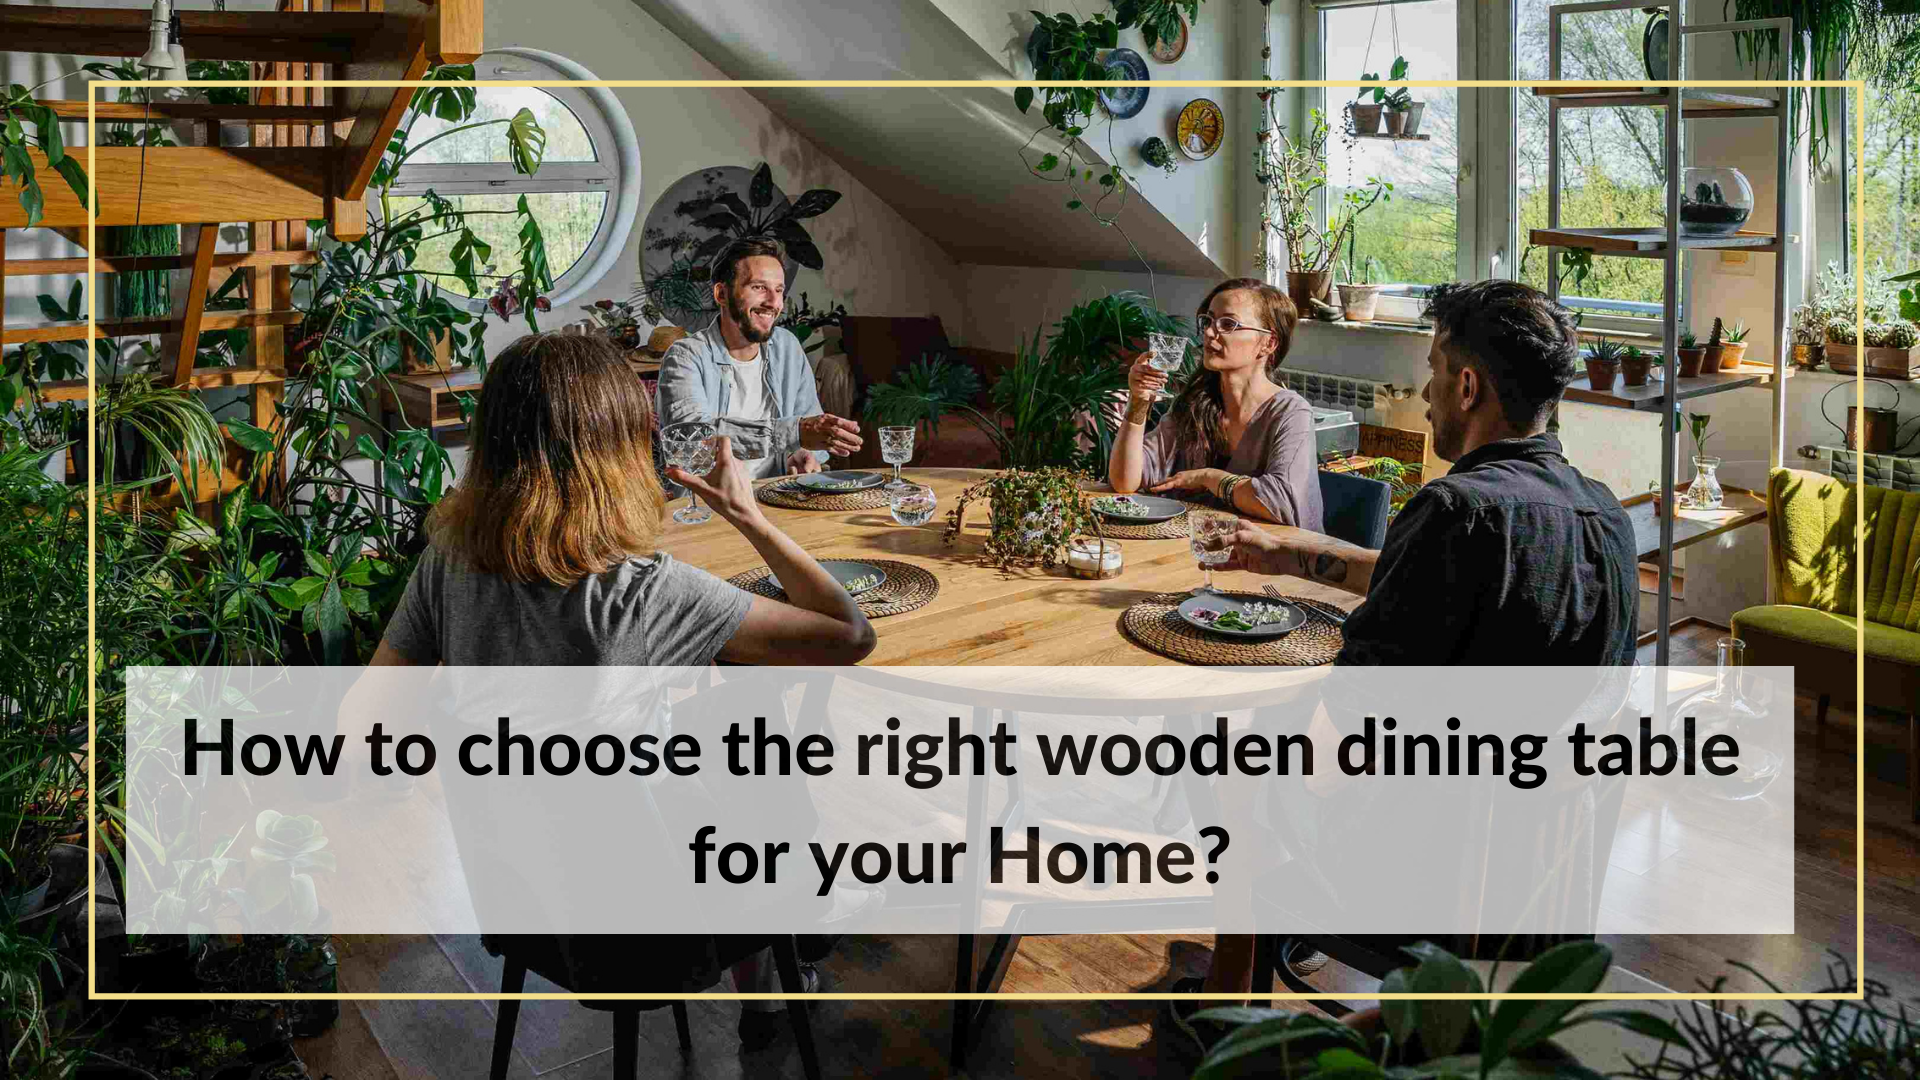 How to choose the right wooden dining table for your Home